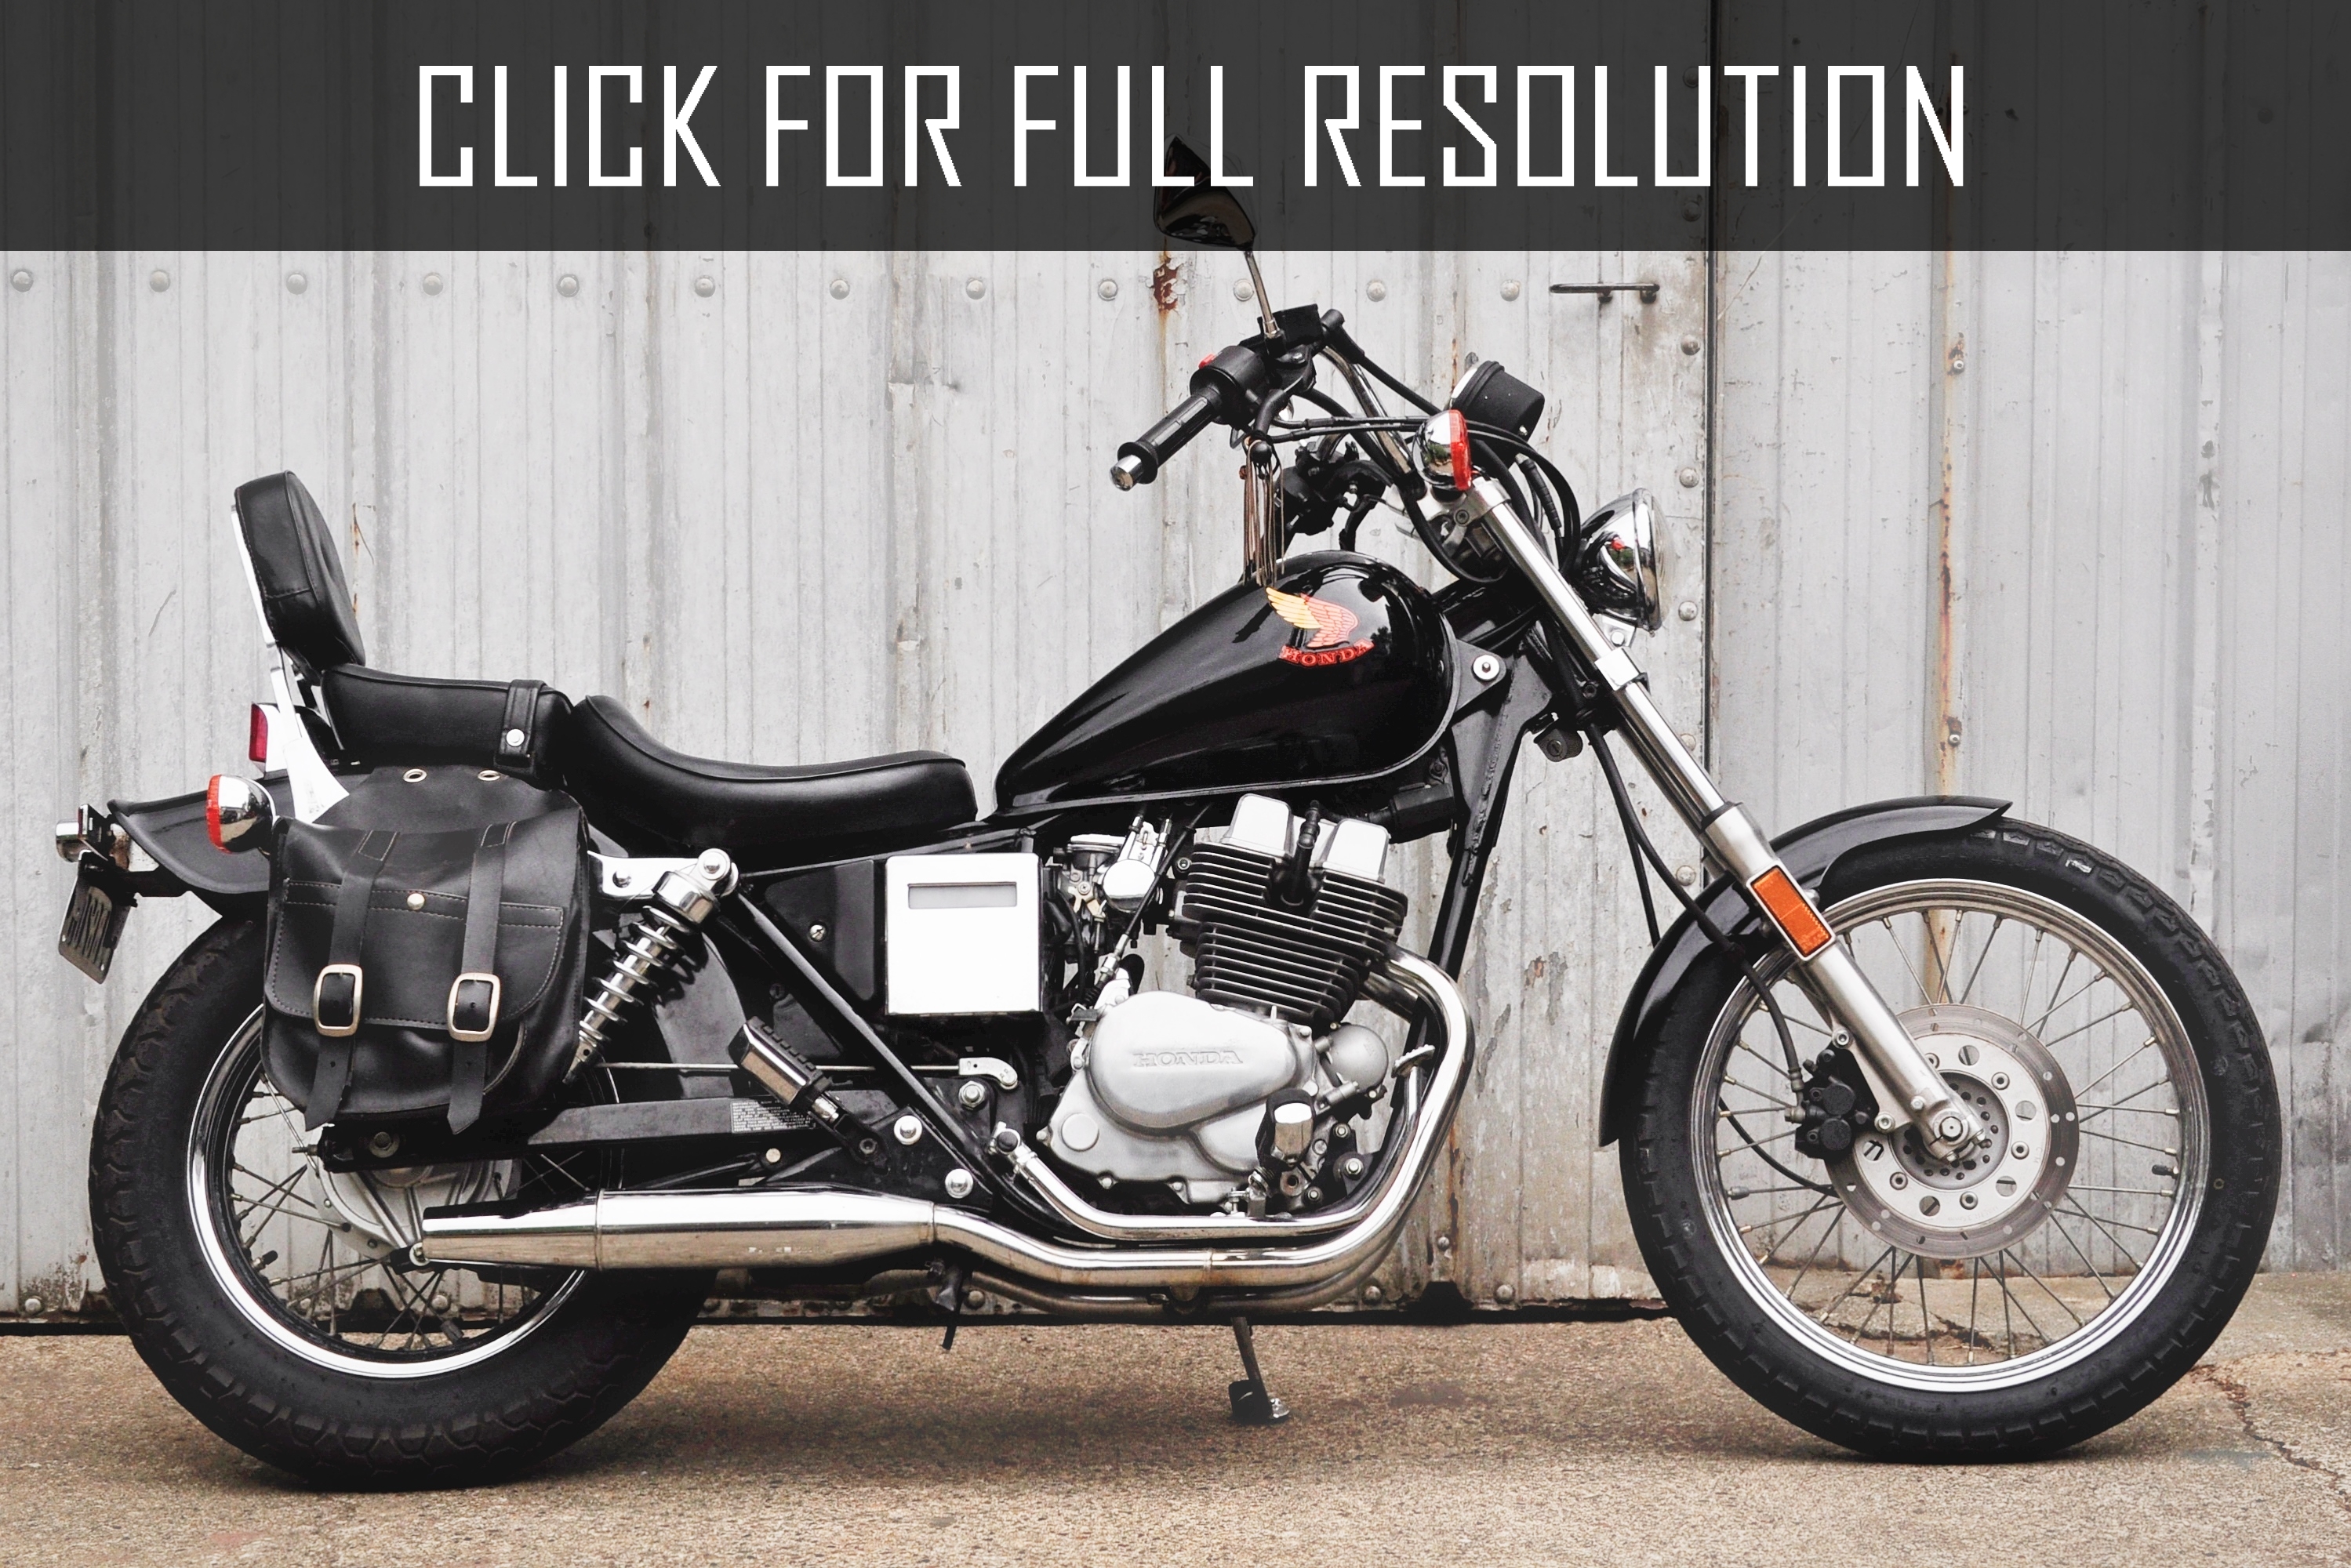 1986 Honda Rebel 250 - news, reviews, msrp, ratings with amazing images